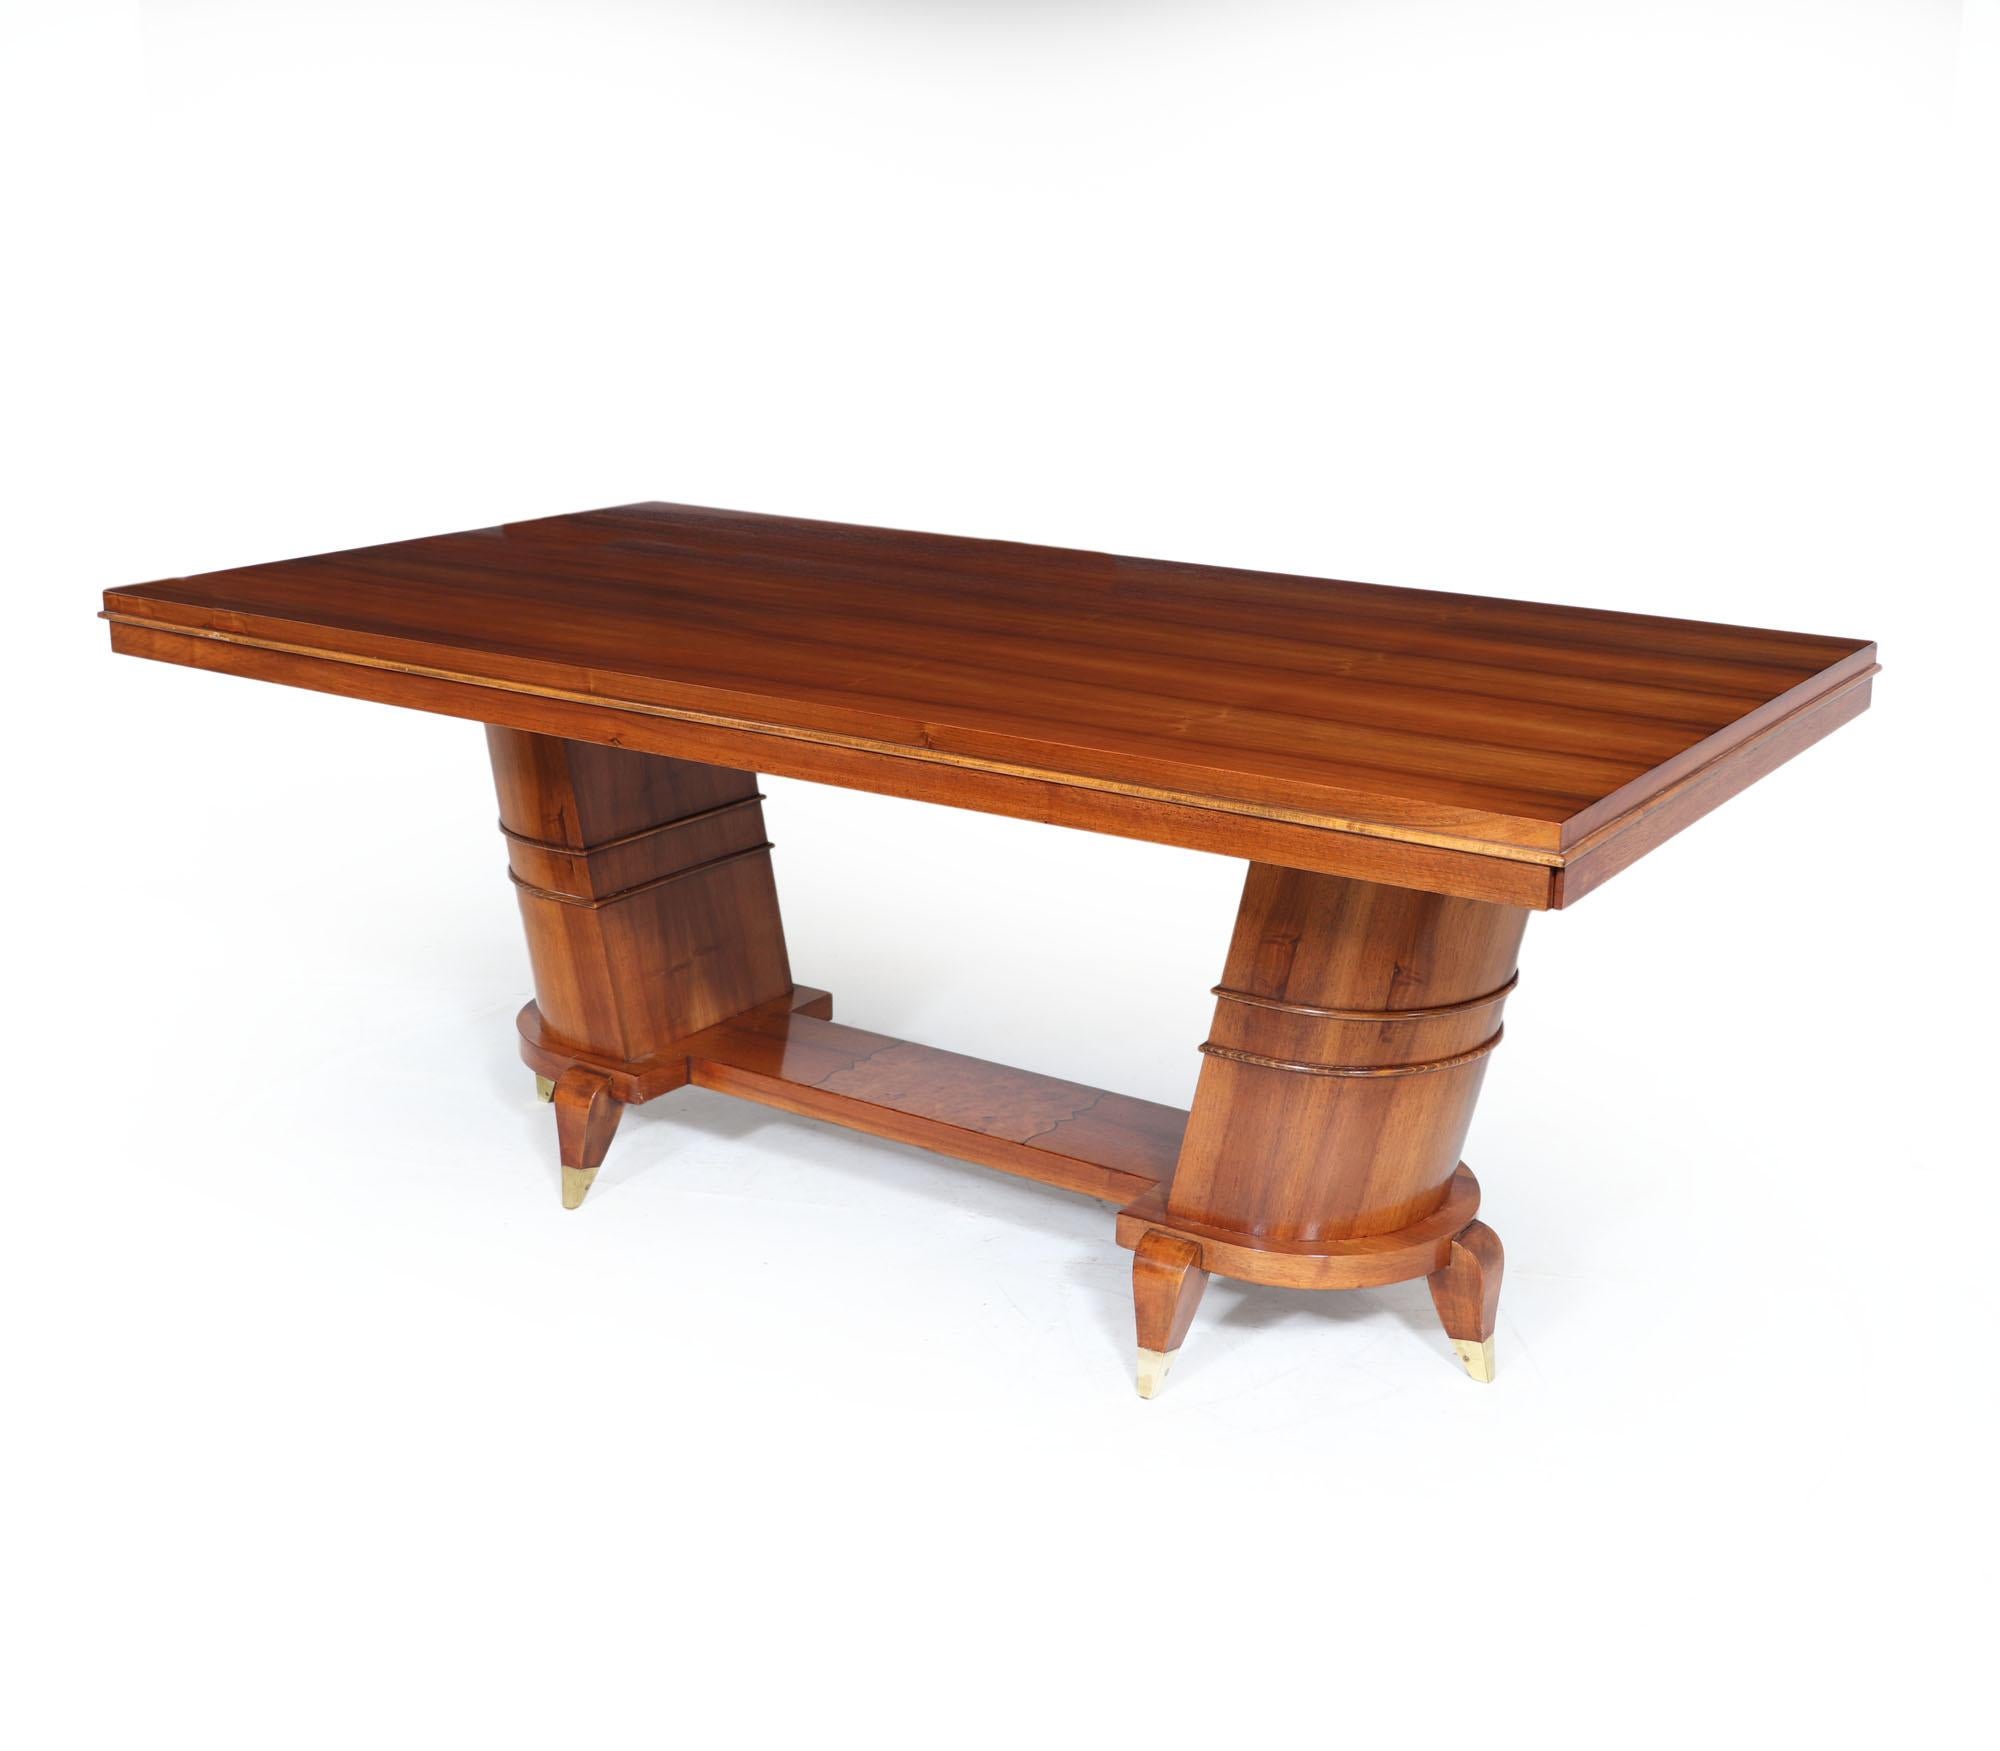 French Art Deco dining table
A very stylish French Art Deco dining table produced in the 1930’s, using straight grain walnut the top extends to fit a further four people so has a max of twelve. The base has two Demi lune angled uprights supporting